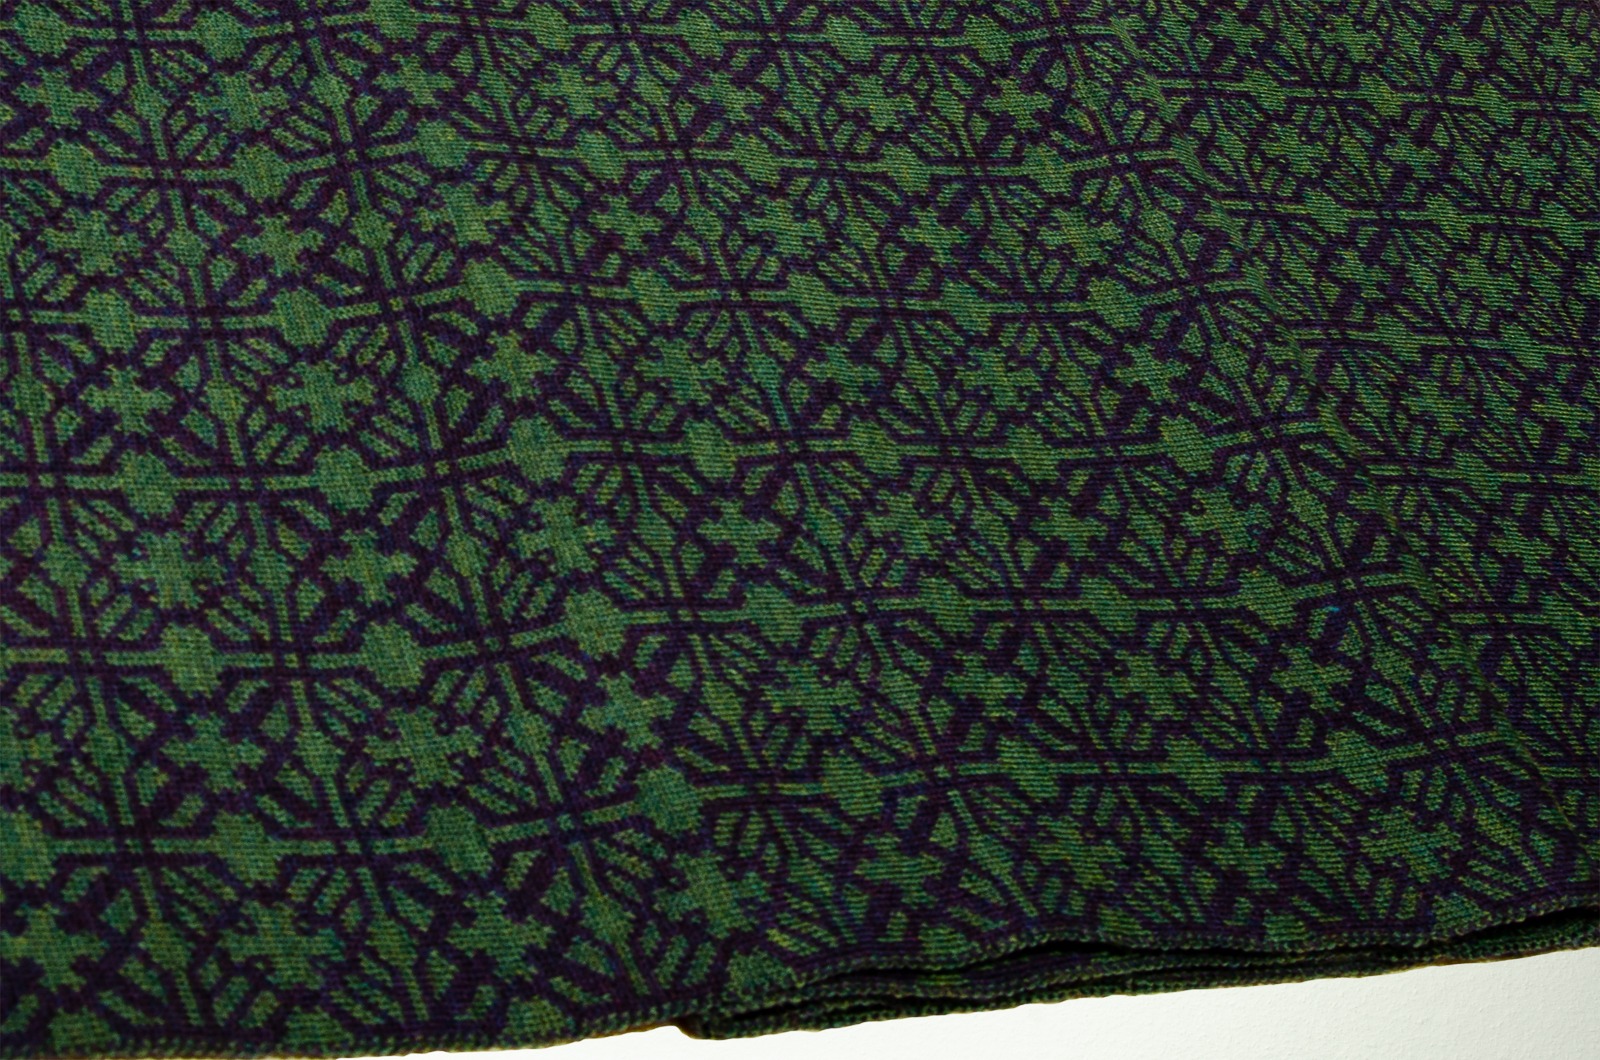 Scarf Ireland knitted from merino wool in dark green and purple 2